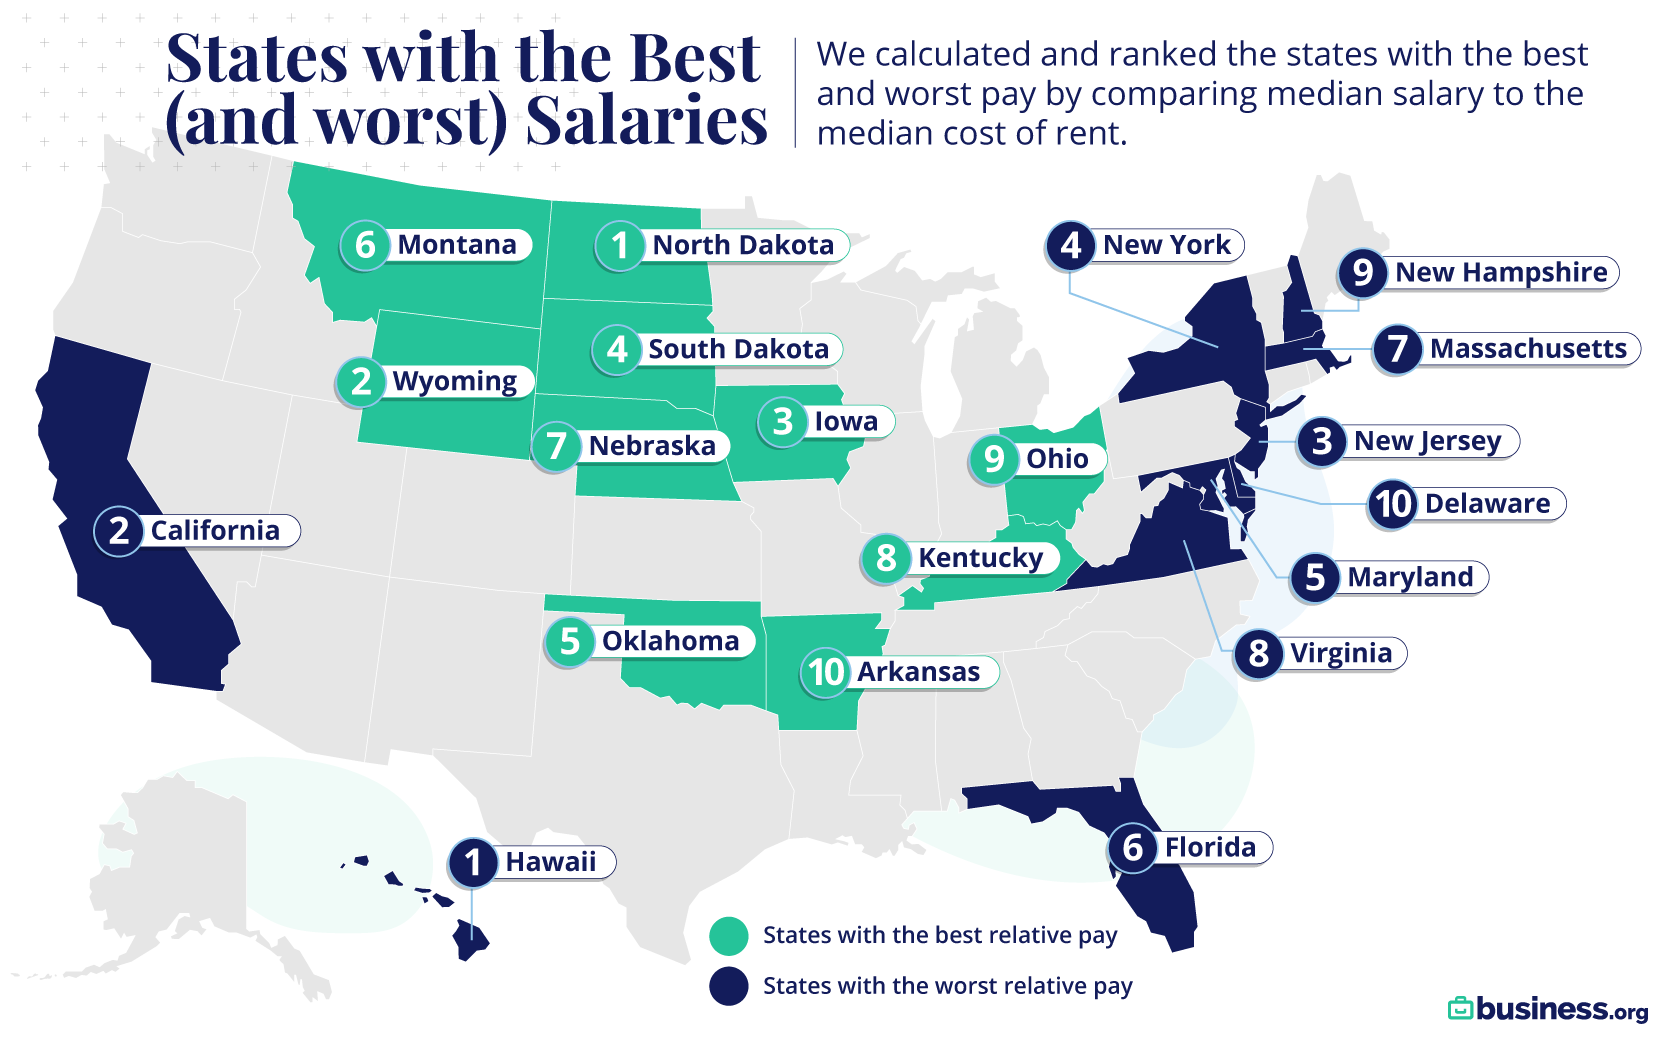 A map of the United States with the states for best and worst salaries highlighted